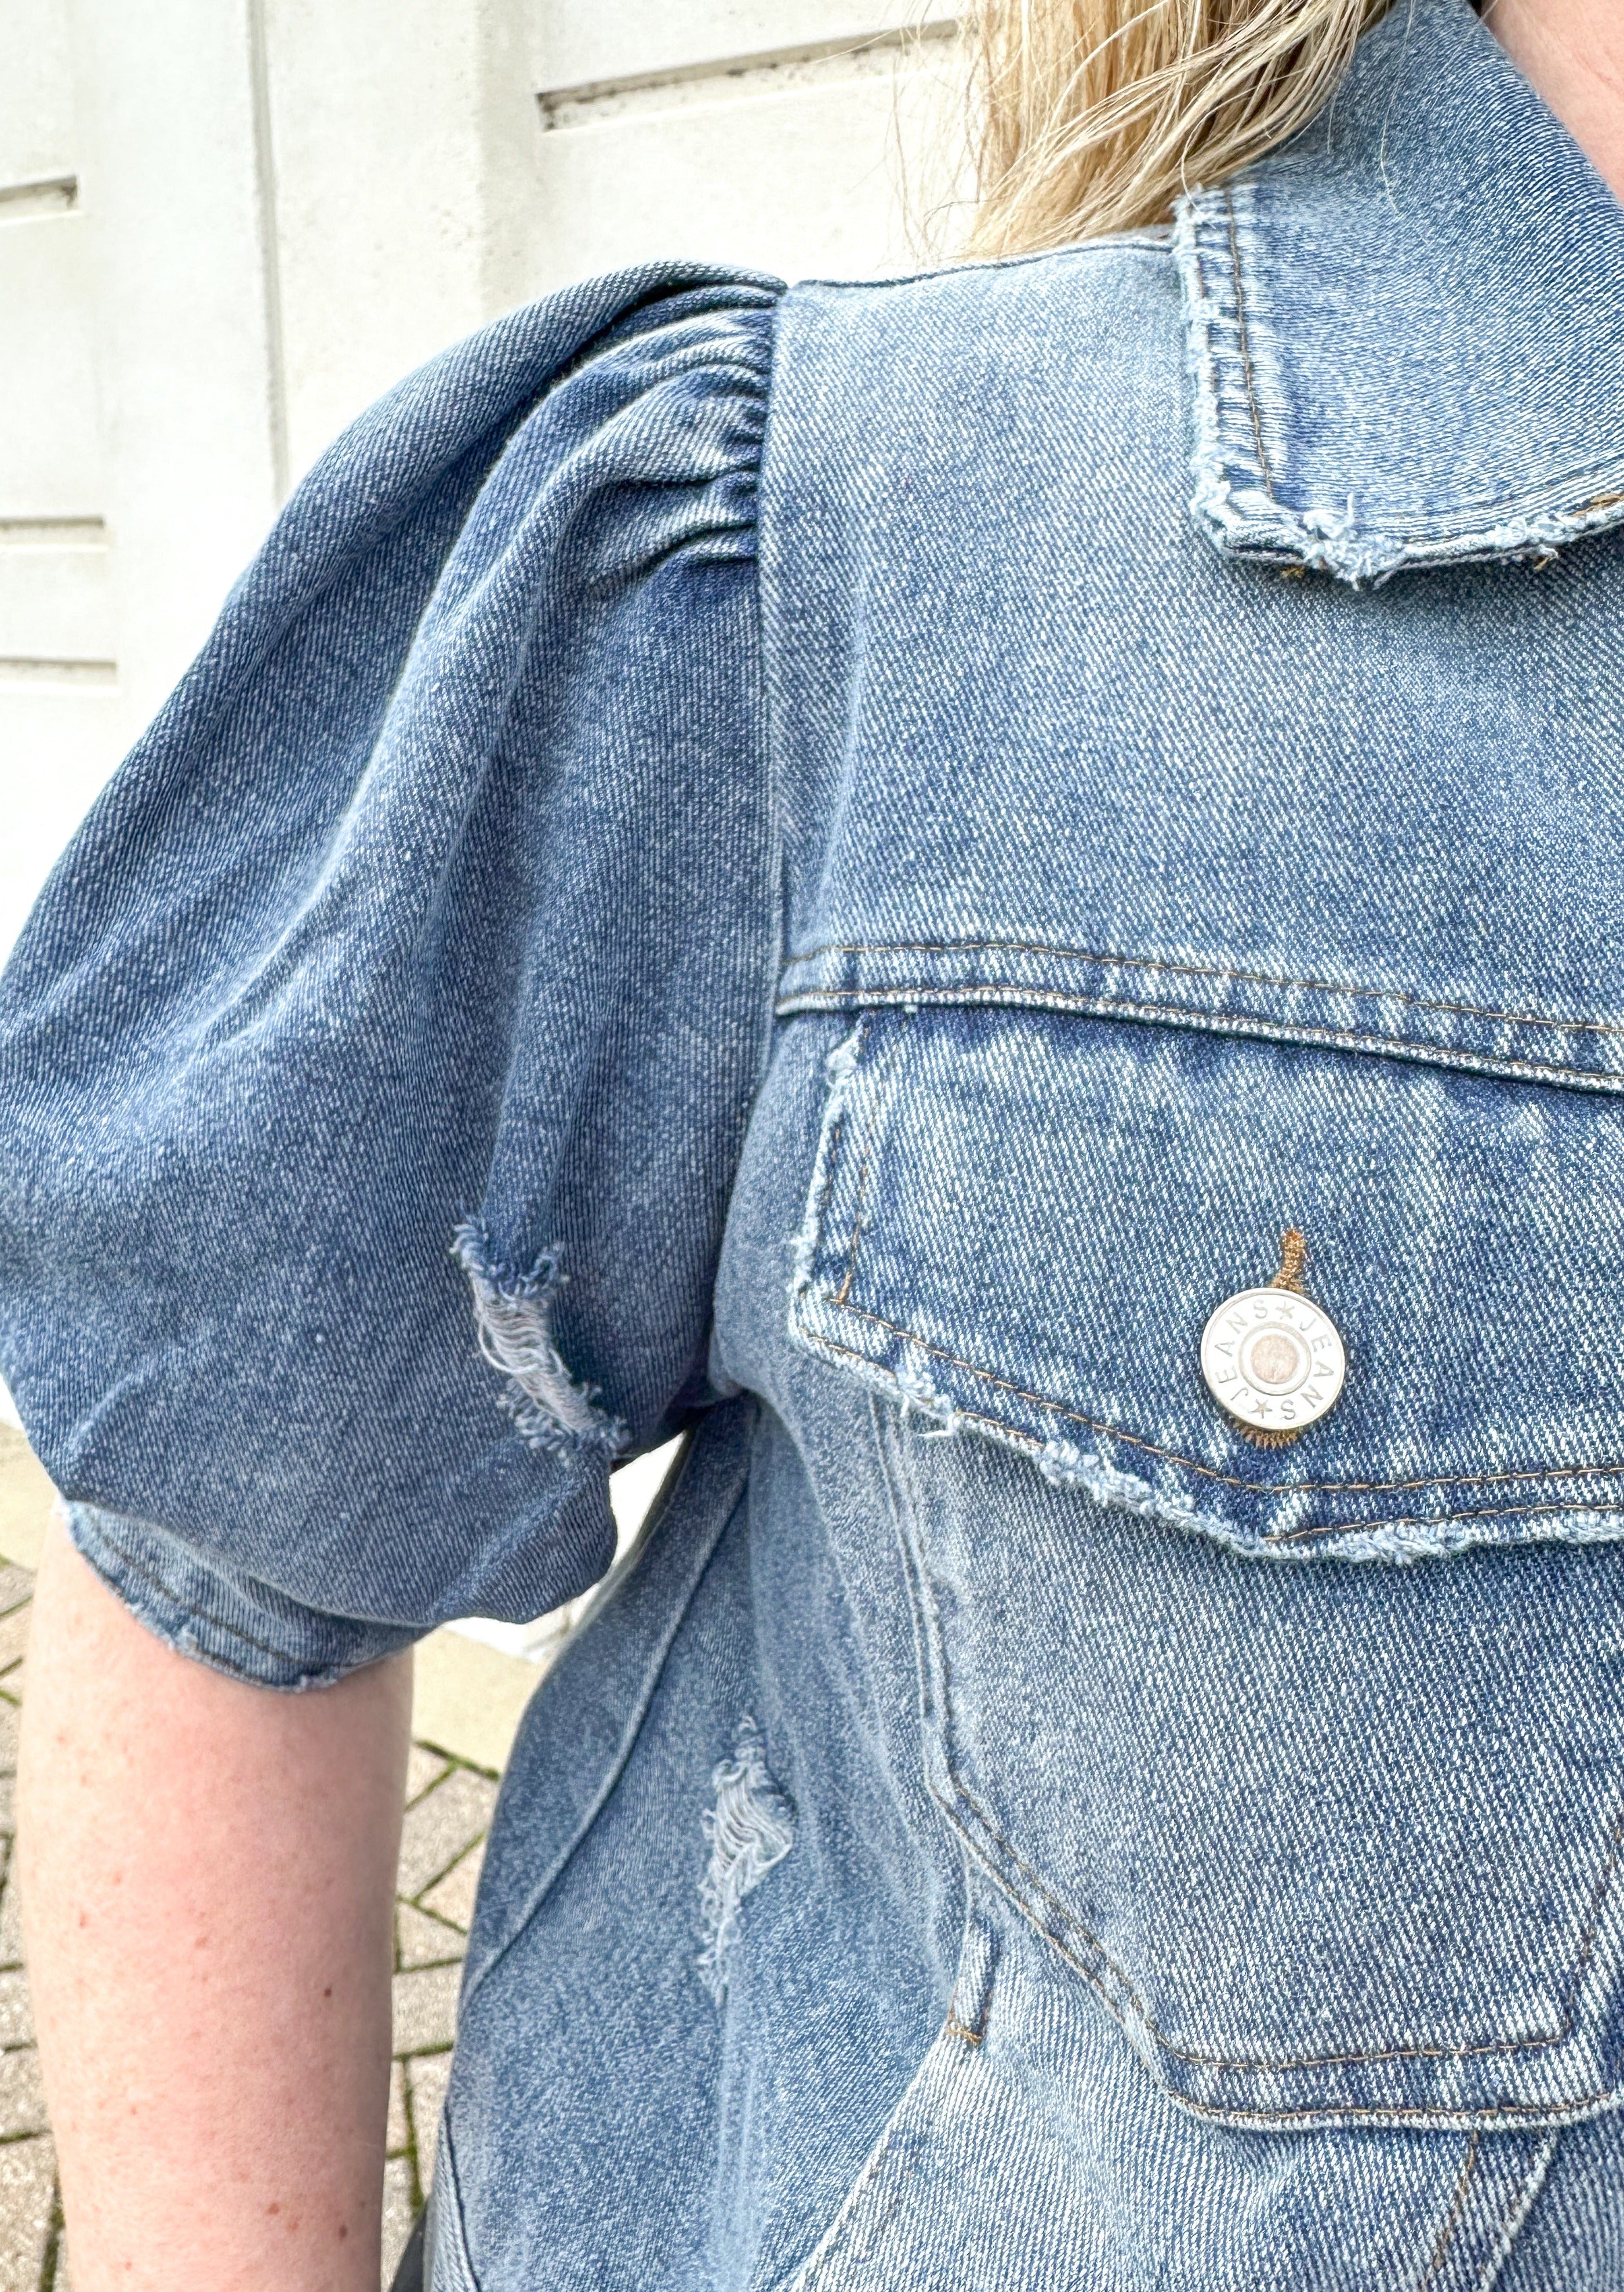 Short puff sleeve jean jacket with banding on the arms,  silver buttons for front closure, collar, pockets on both sides